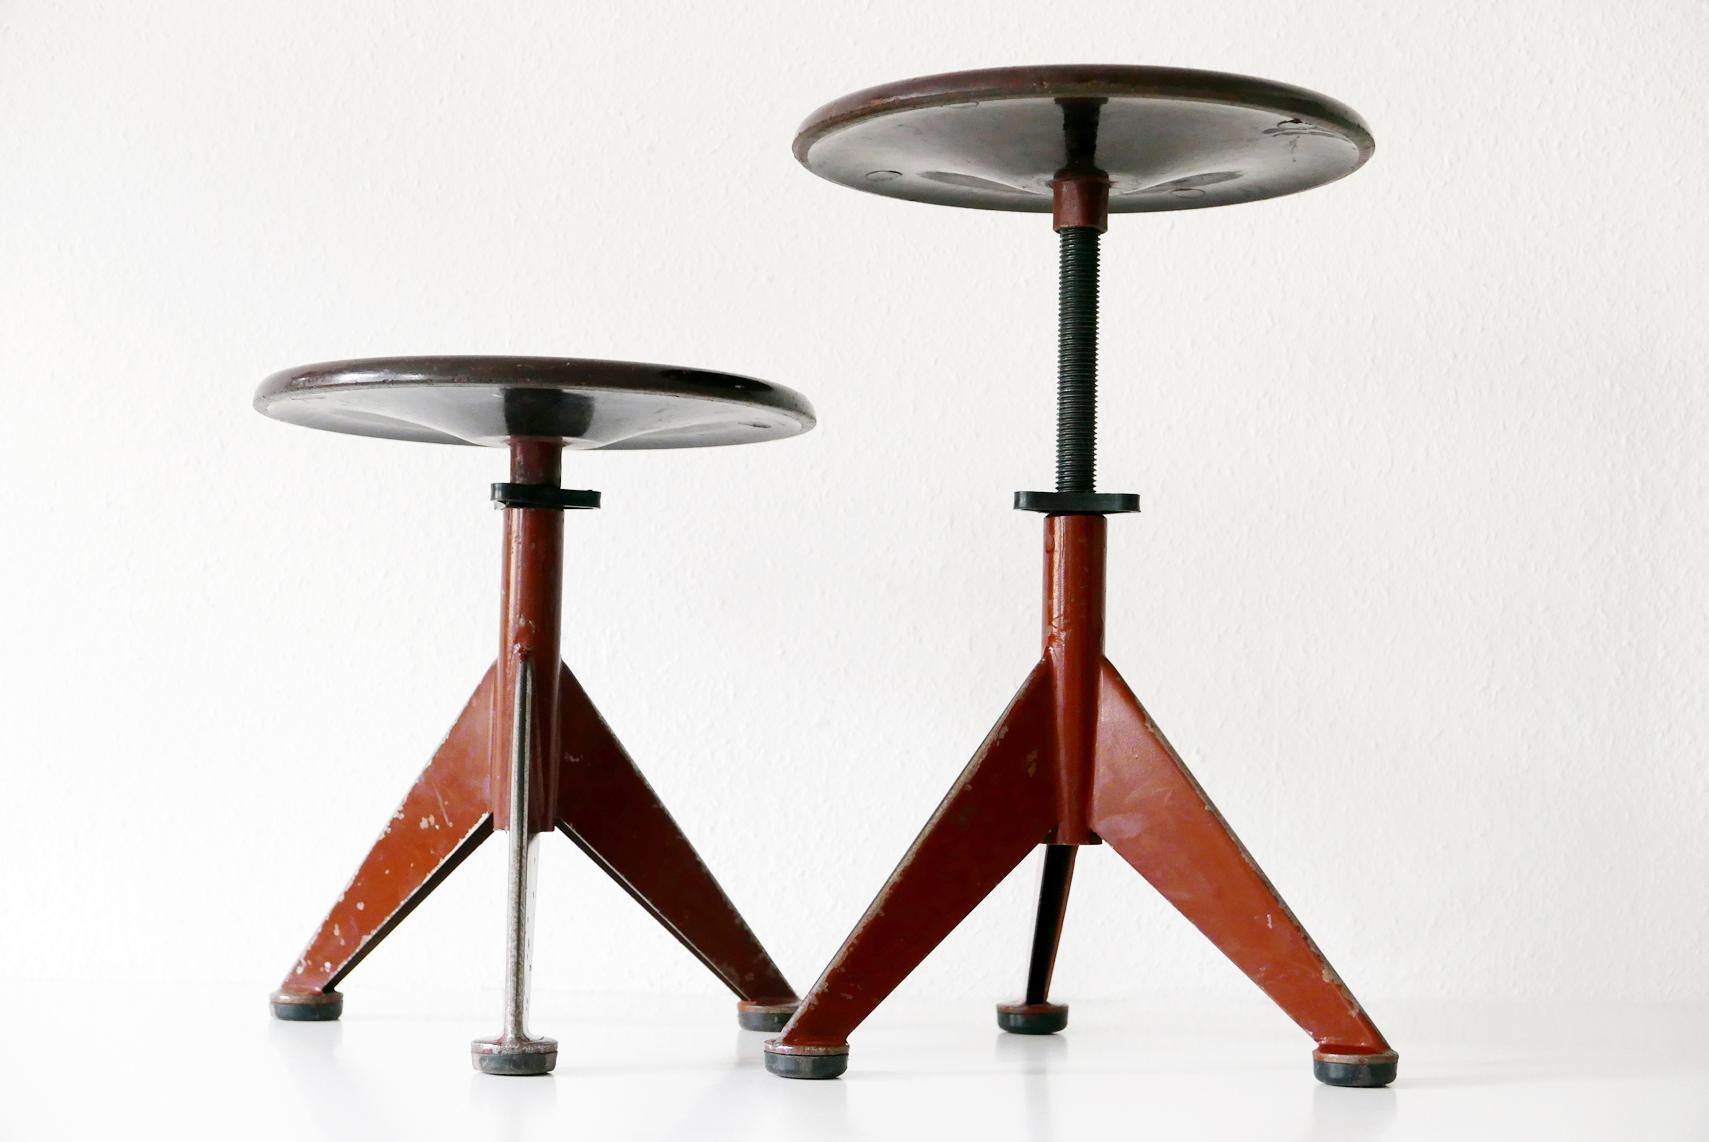 Mid-20th Century Set of Two Industrial Workshop Stools by AB Odelberg Olsen, 1930s, Sweden